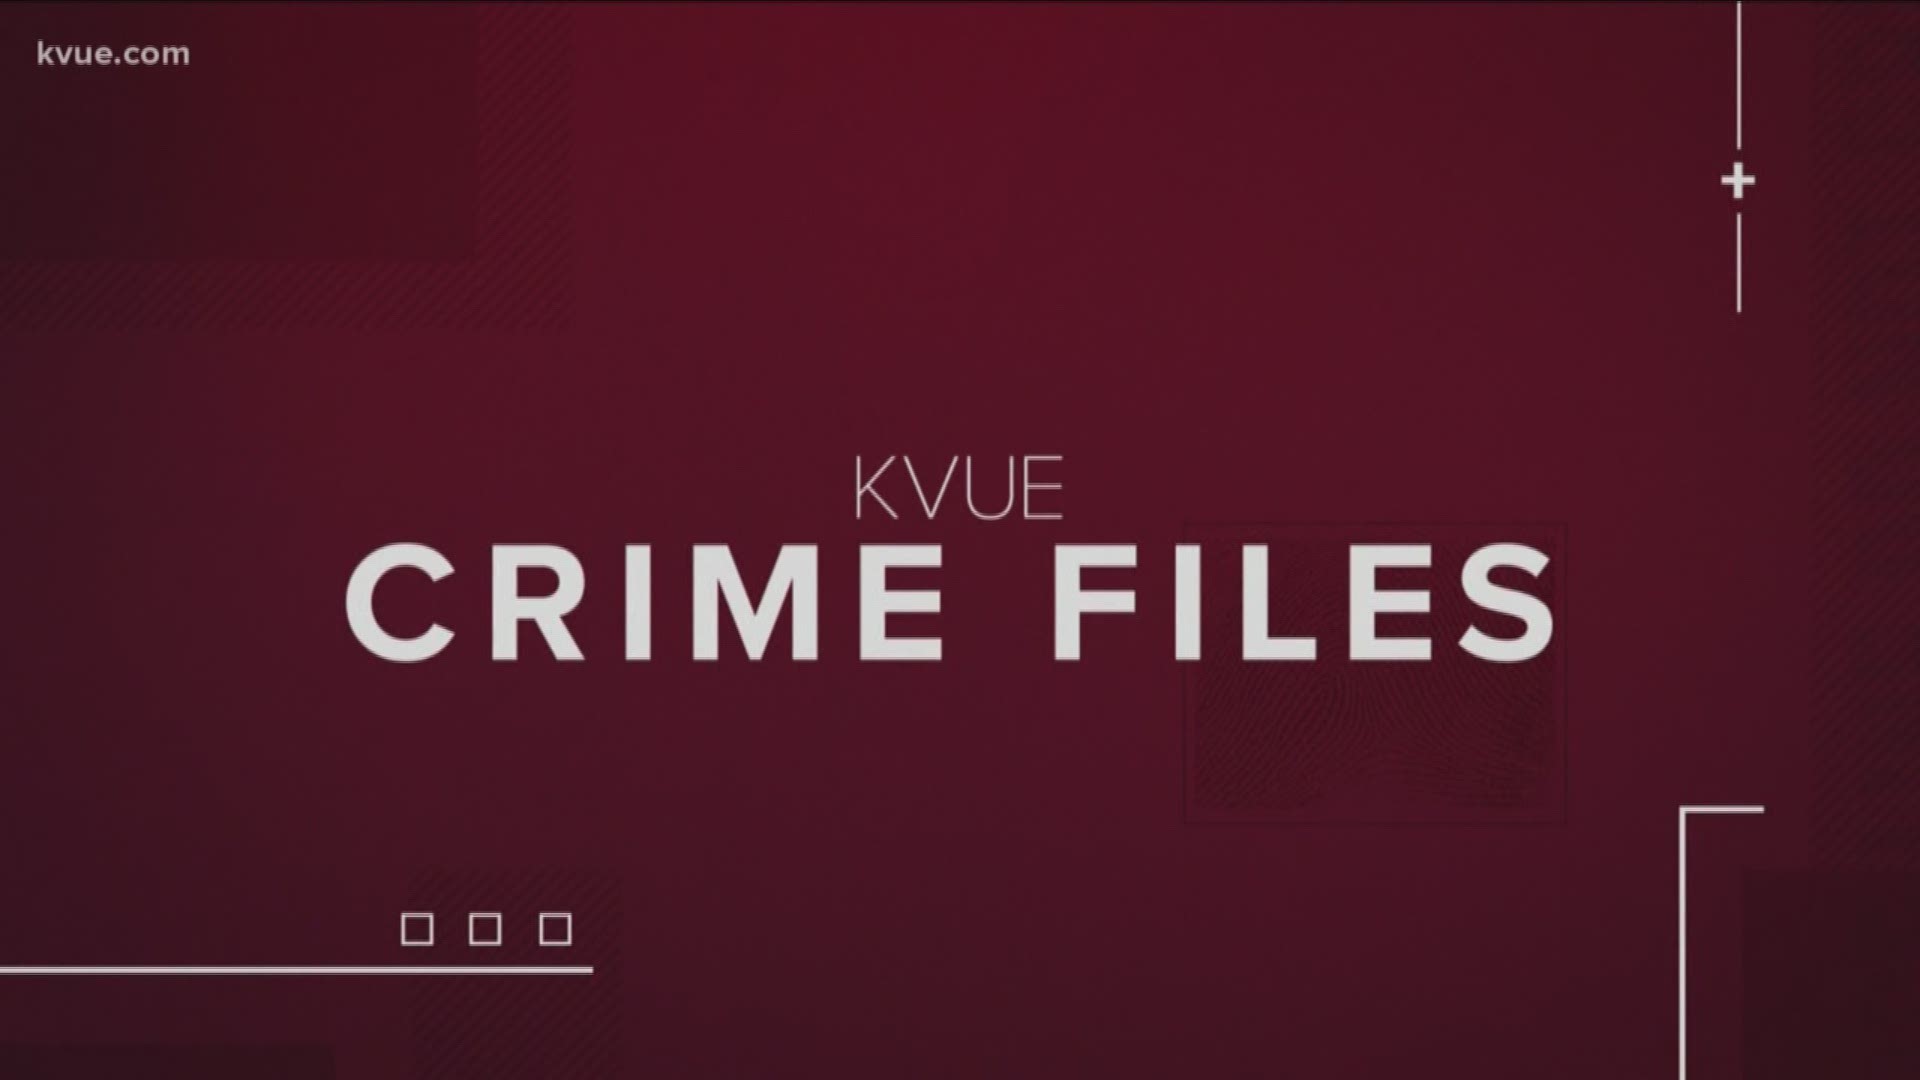 Tony Plohetski traveled to the crime scene and shares never-before-released details about the case in the latest installment of KVUE Crime Files.